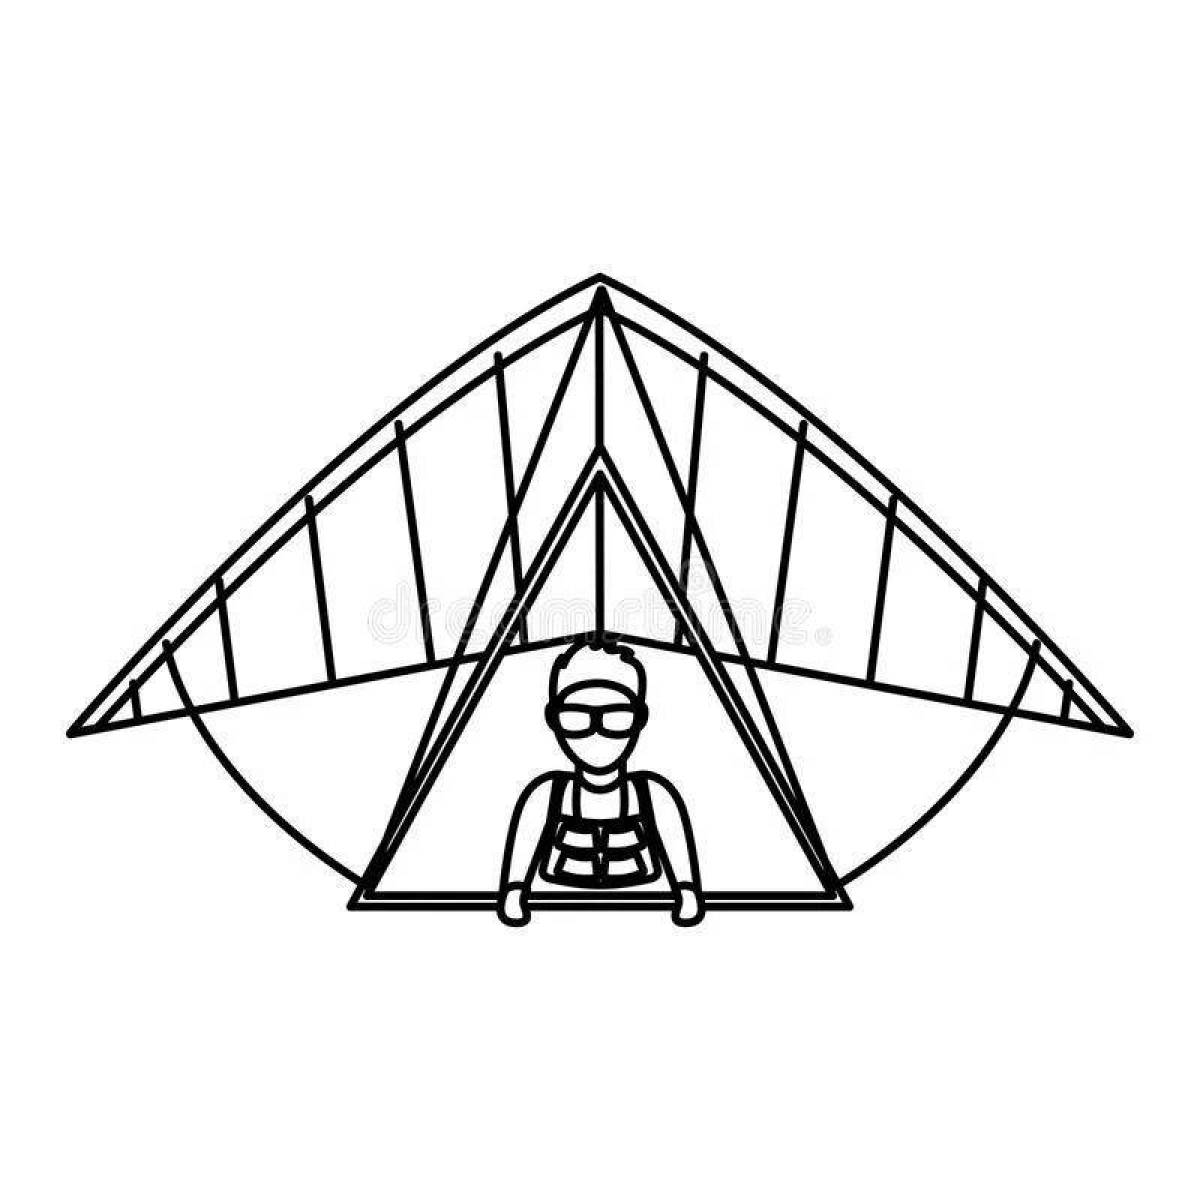 Sweet hang glider coloring page